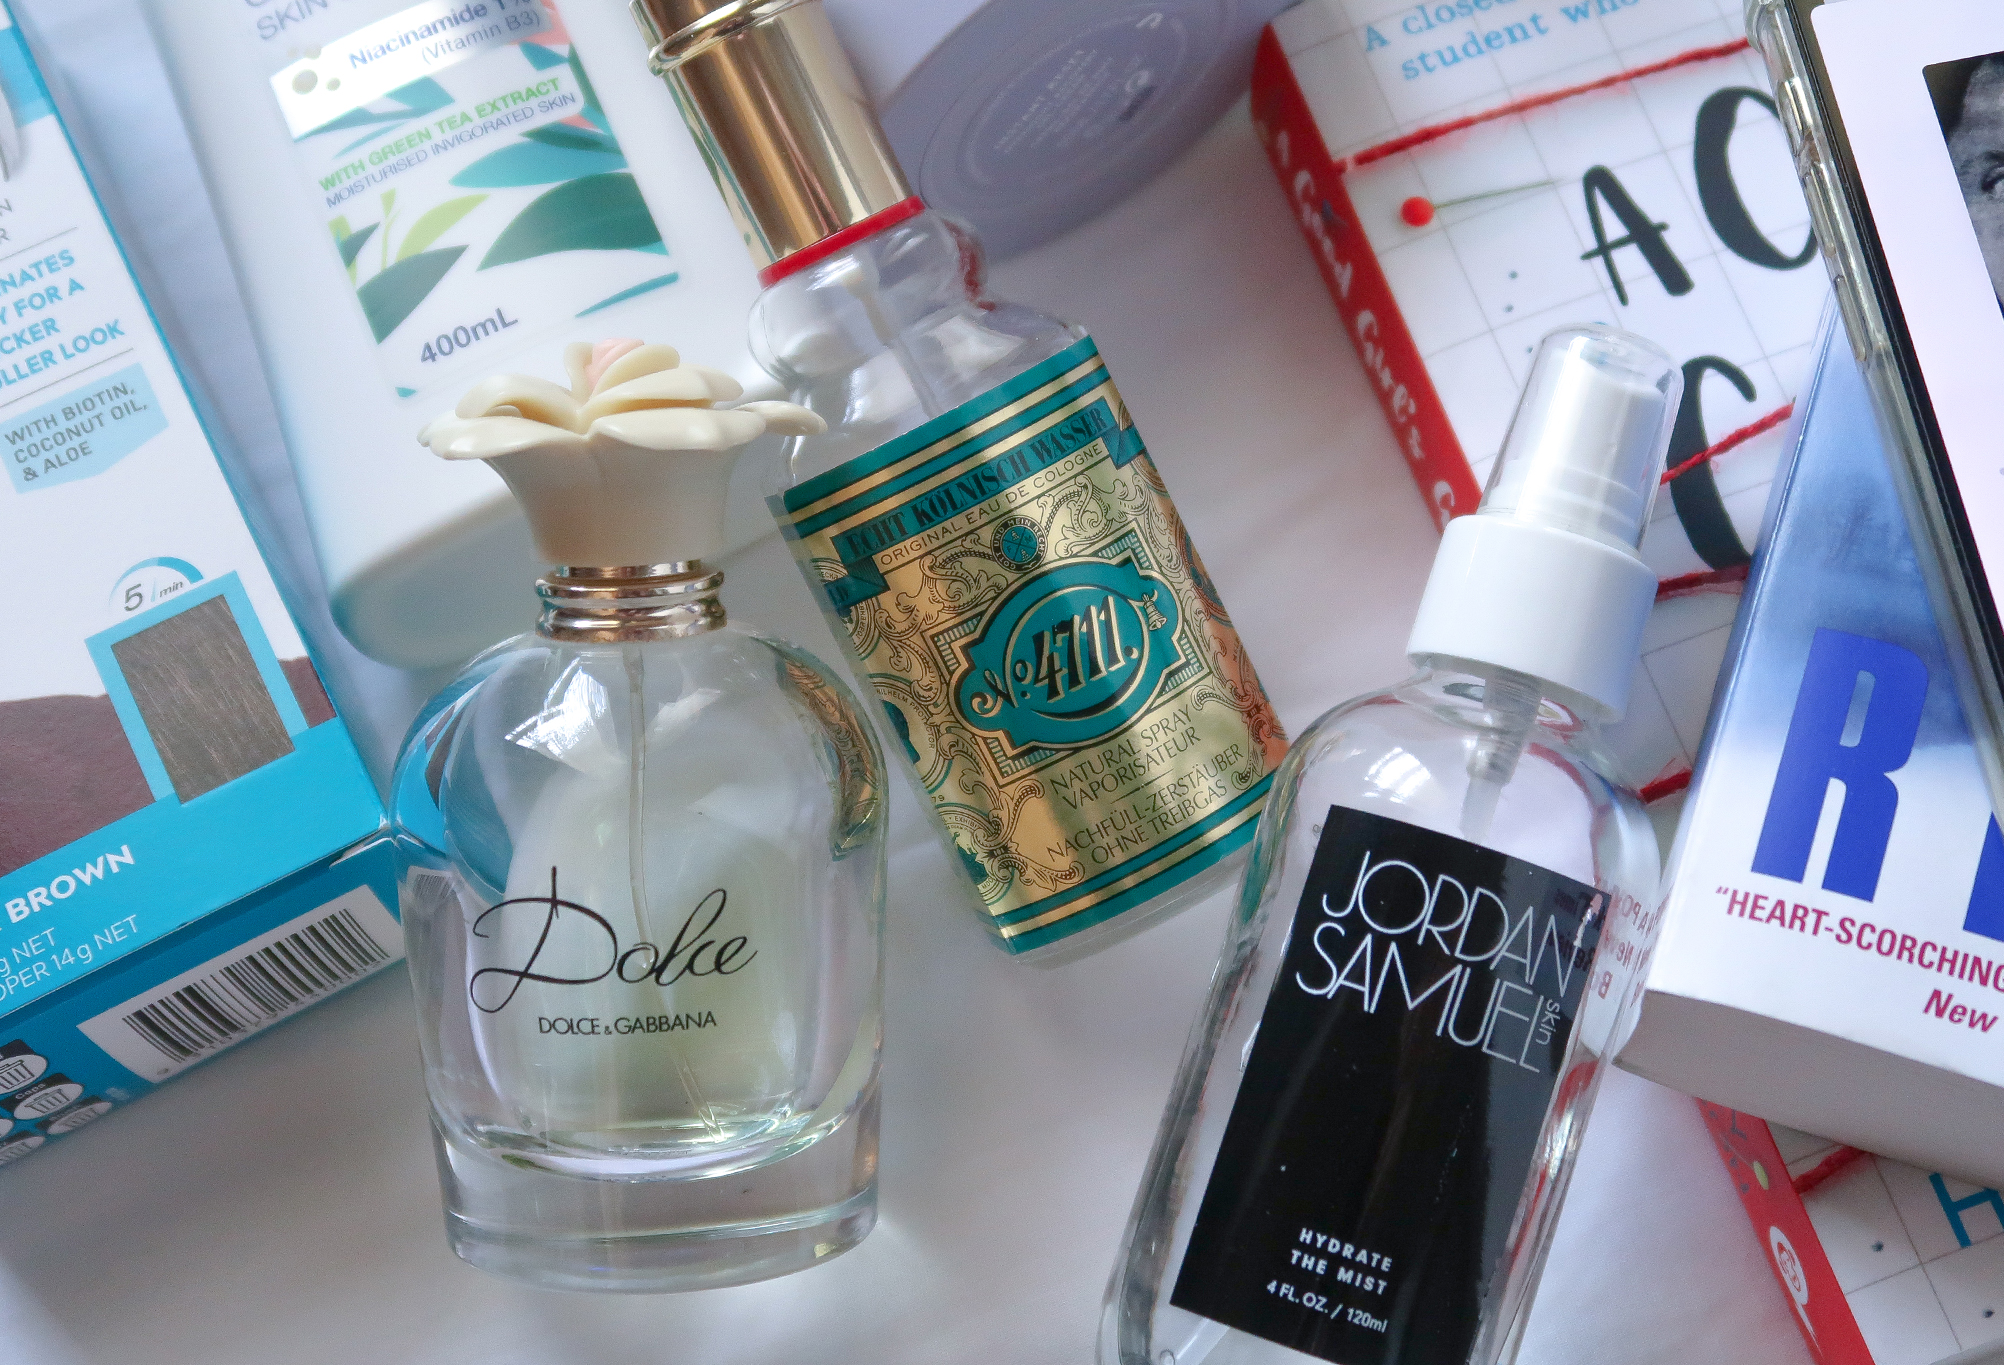 Dolce by Dolce & Gabbana, 4711 EDP and Jordan Samuel Hydrate Miss